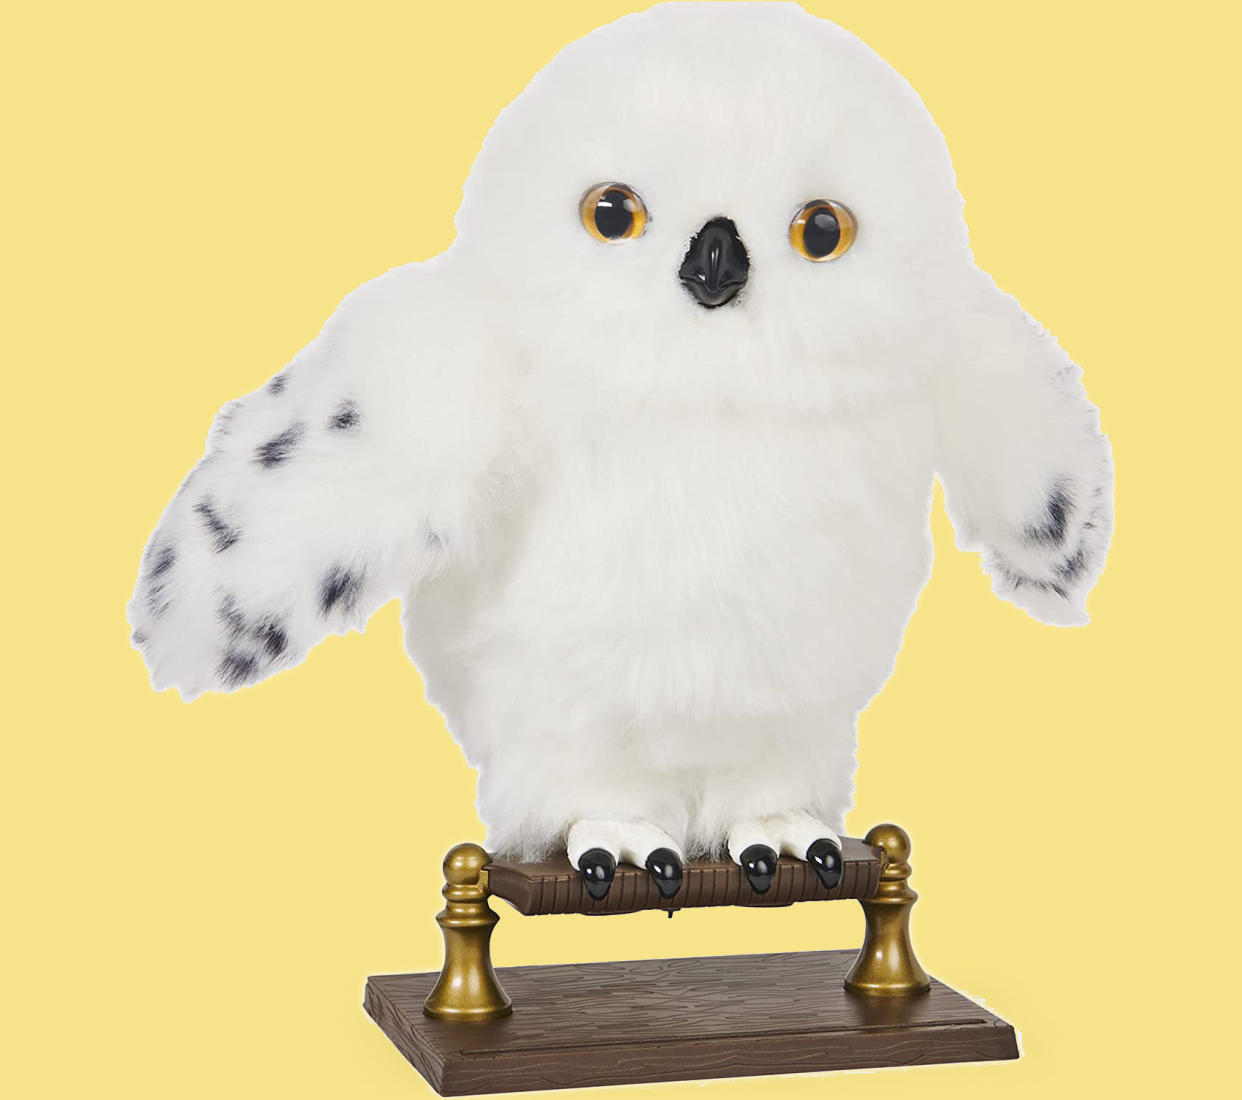 Enchanting Hedwig Interactive Owl sitting on perch